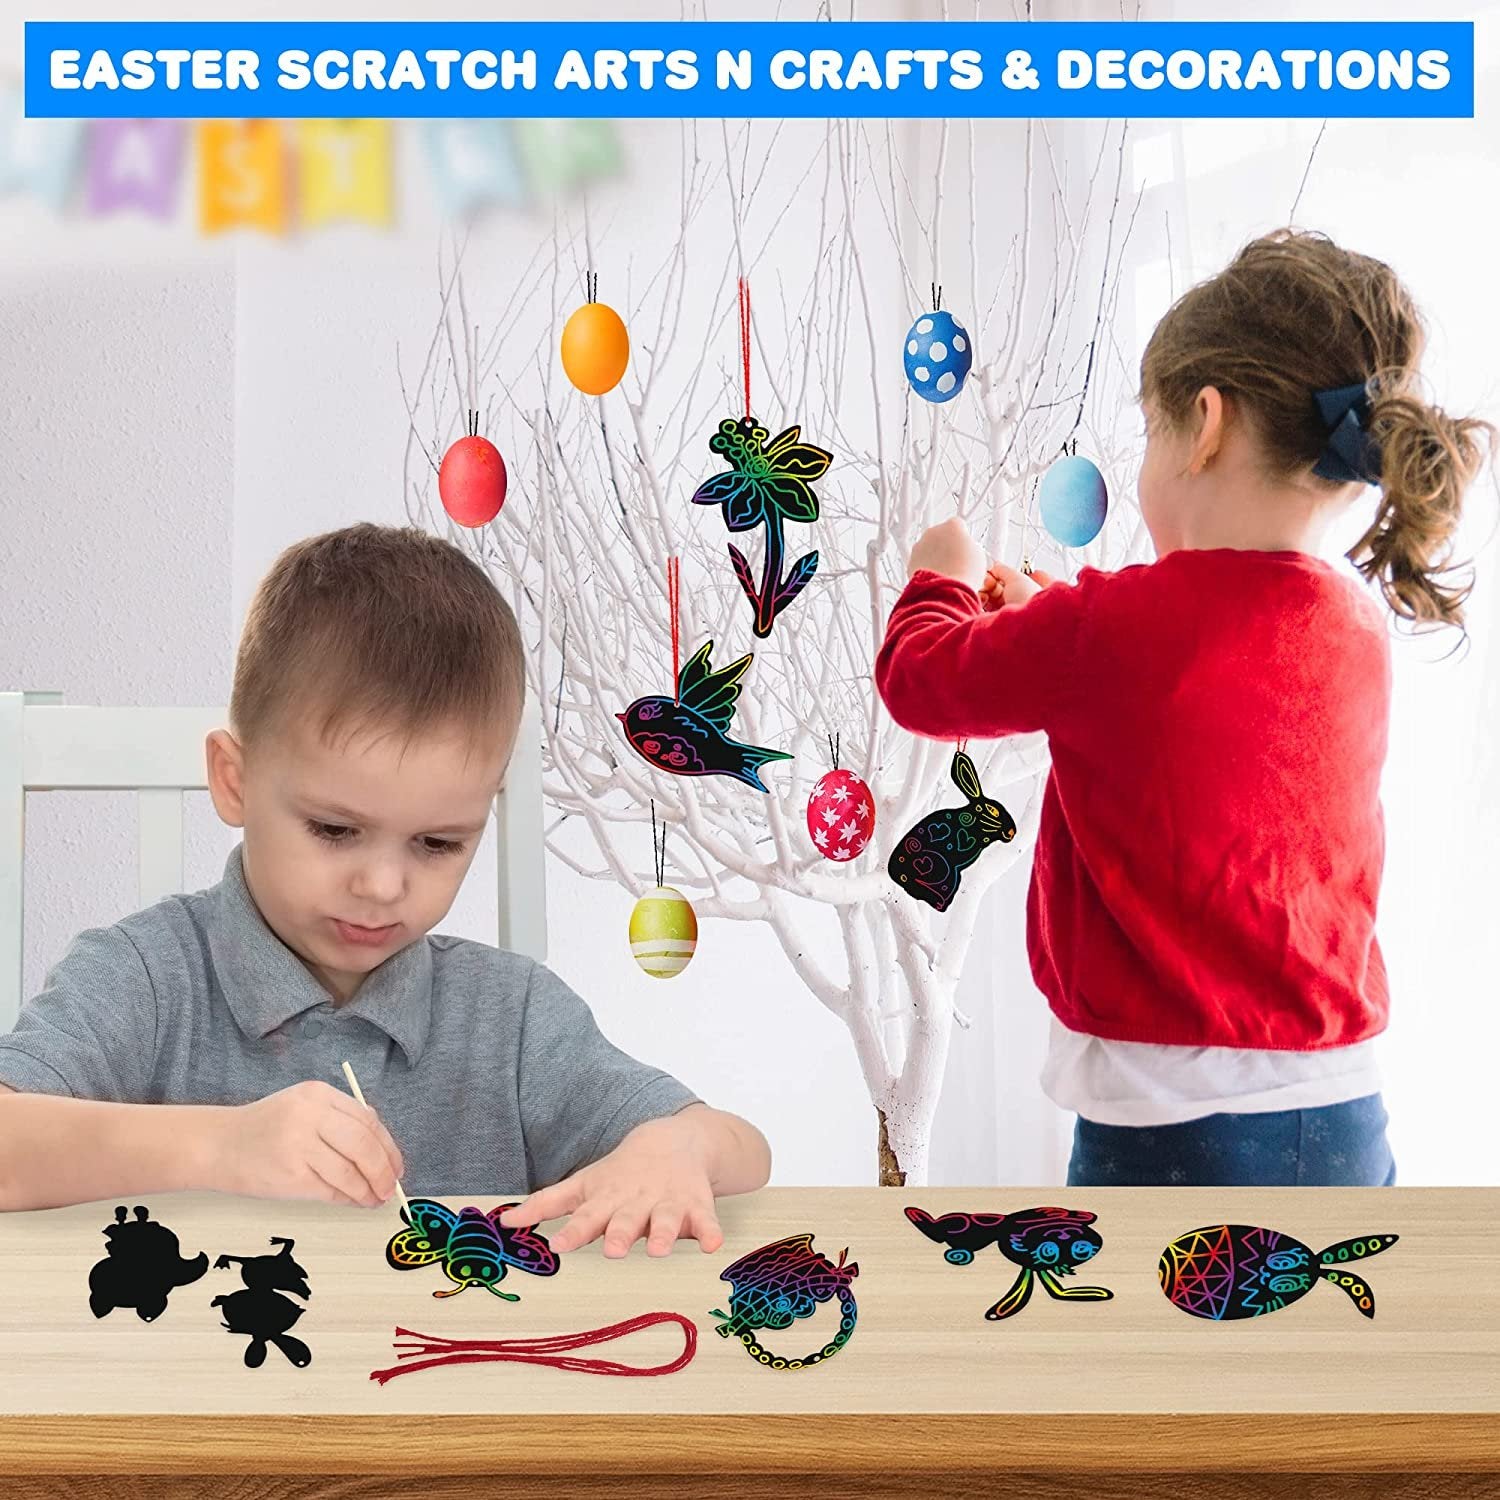 ArtCreativity 48 Pack Easter Scratch Art Set for Kids, Set of 48 Scratch Art Ornaments, Wooden Stick, & Ribbon, Easter Kids Crafts, Rainbow Scratch Ornaments for Home Tree Decor & Easter Party Favors